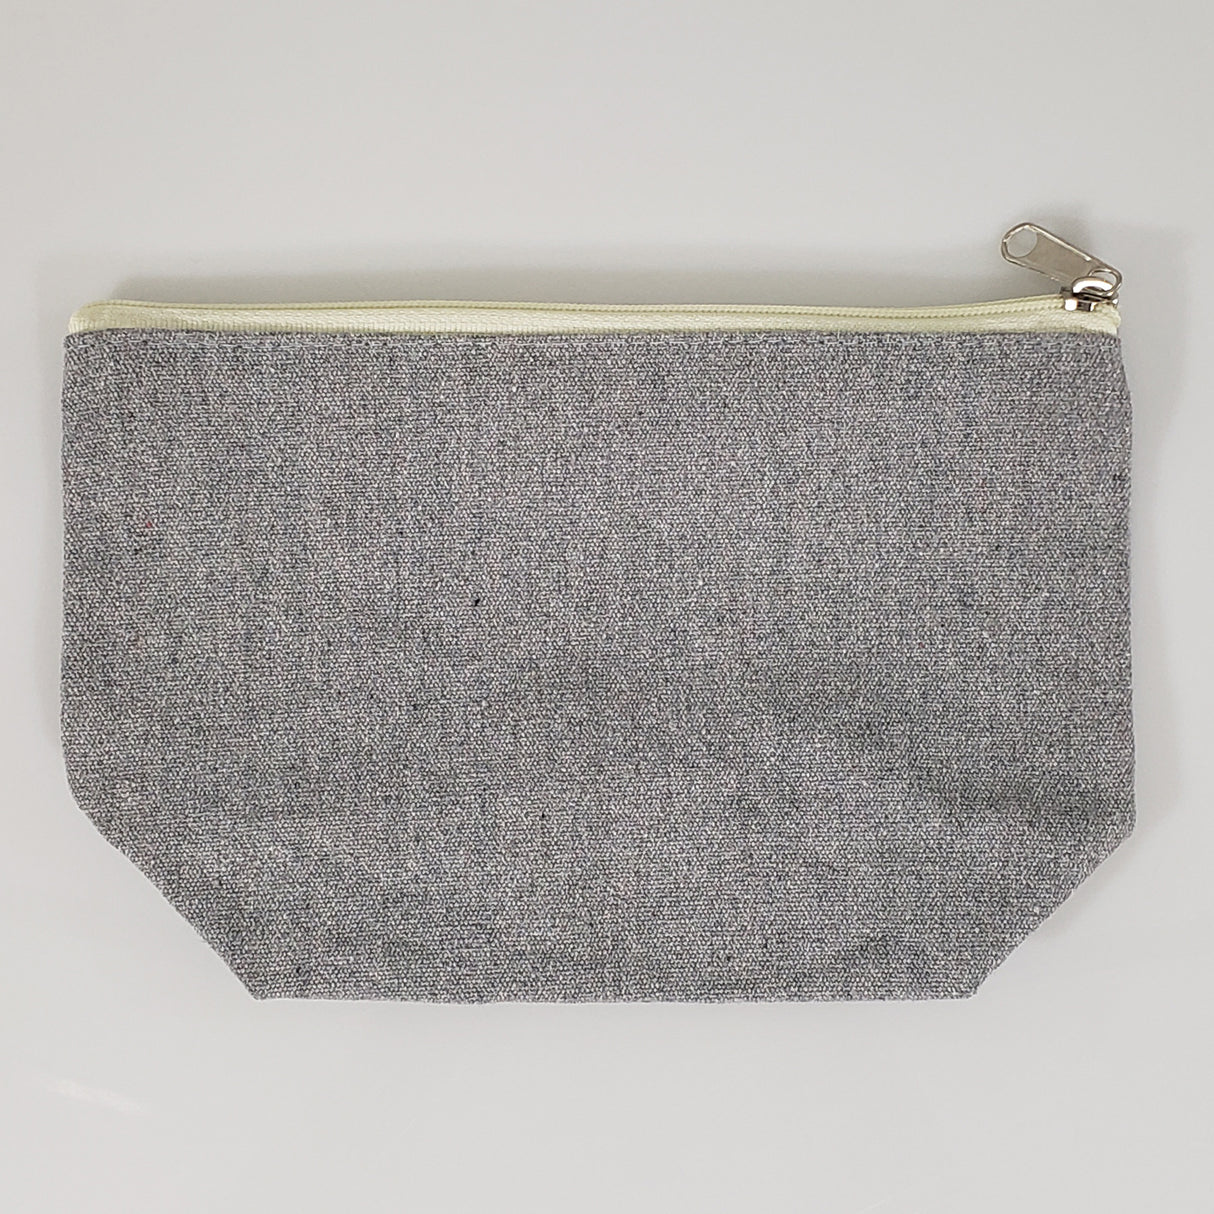 120 ct Large Size Recycled Flat Zipper Cosmetic Bag - By Case